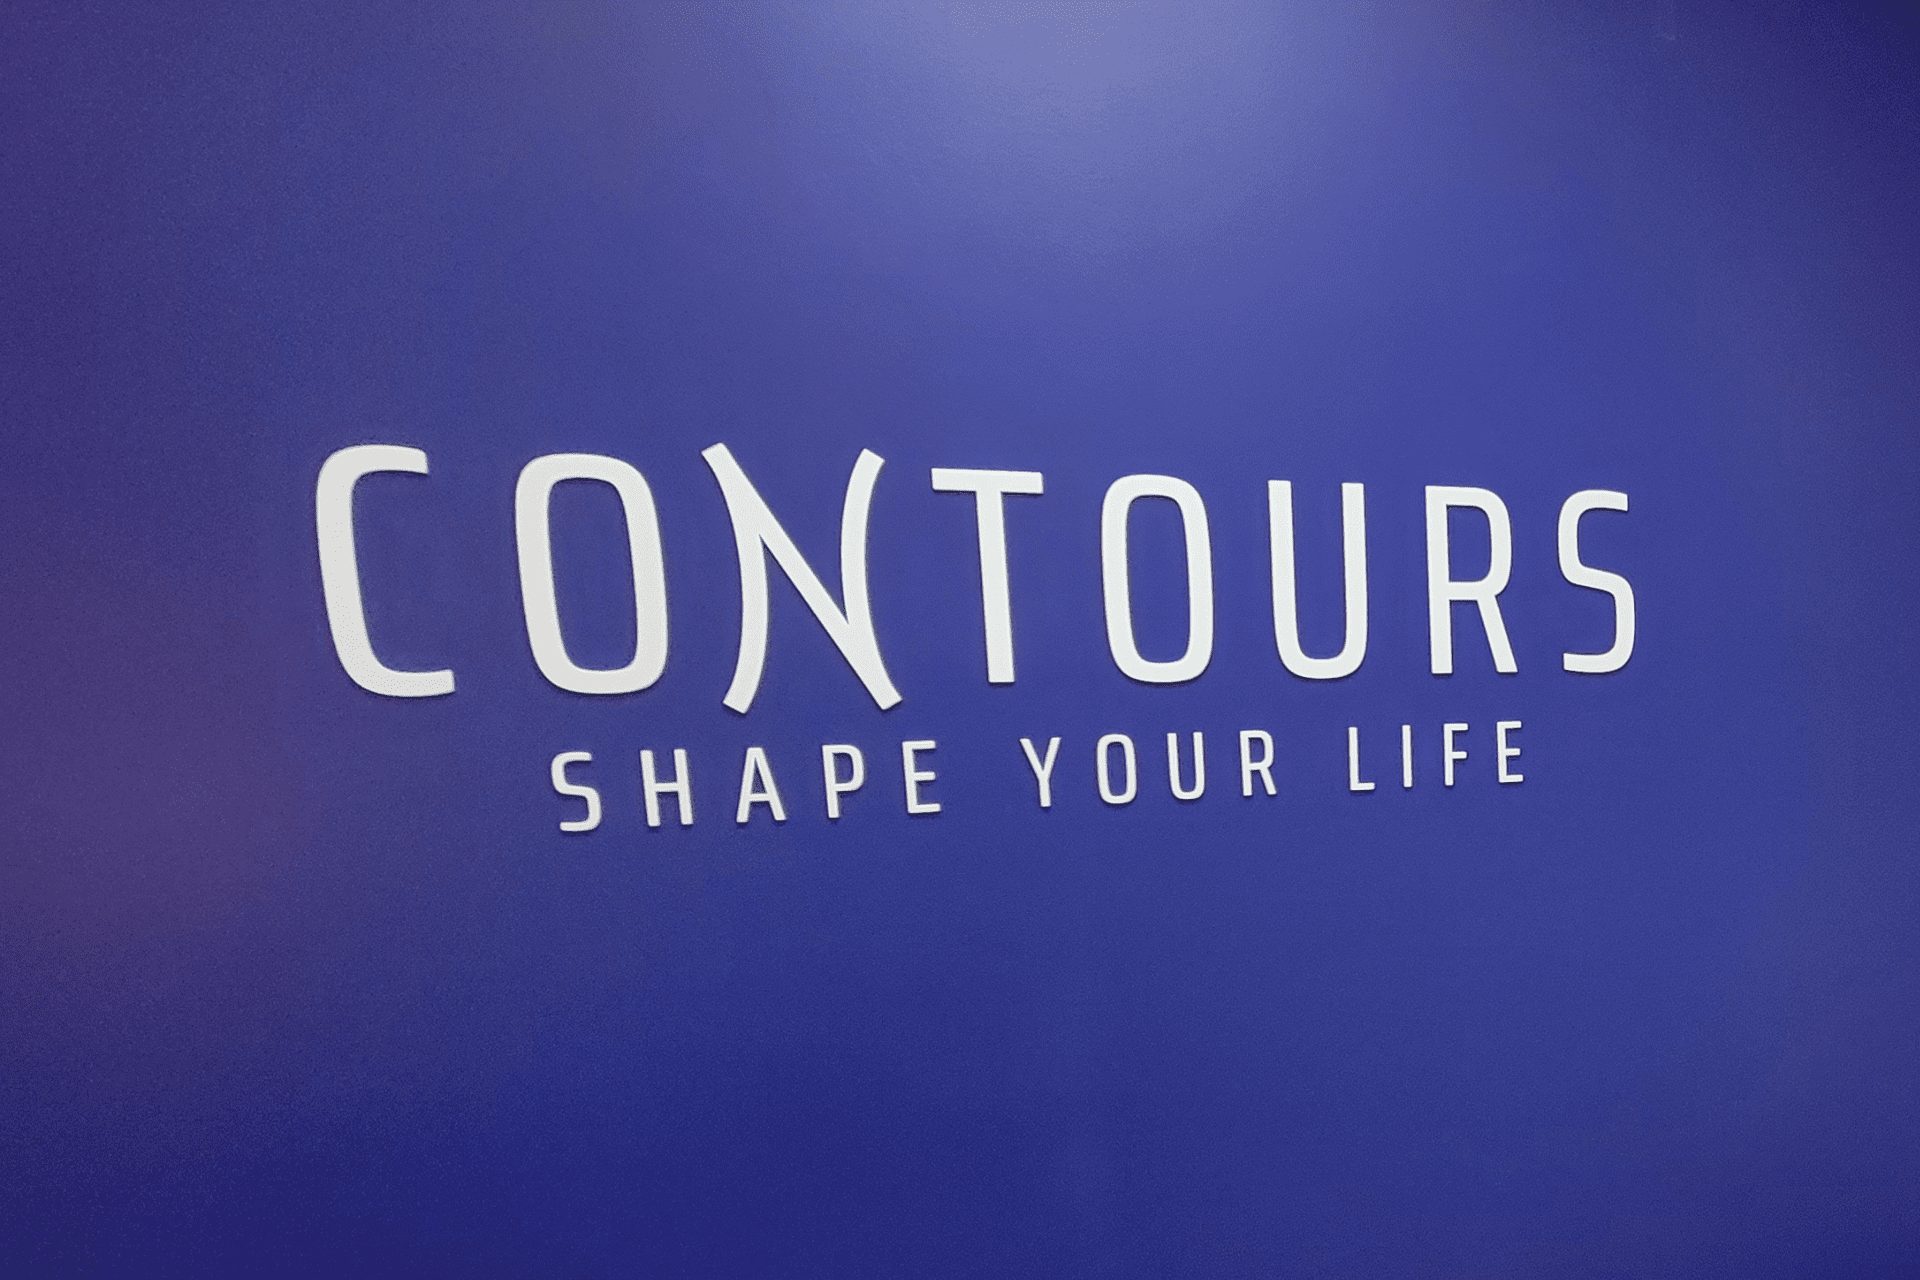 The Story of Contours